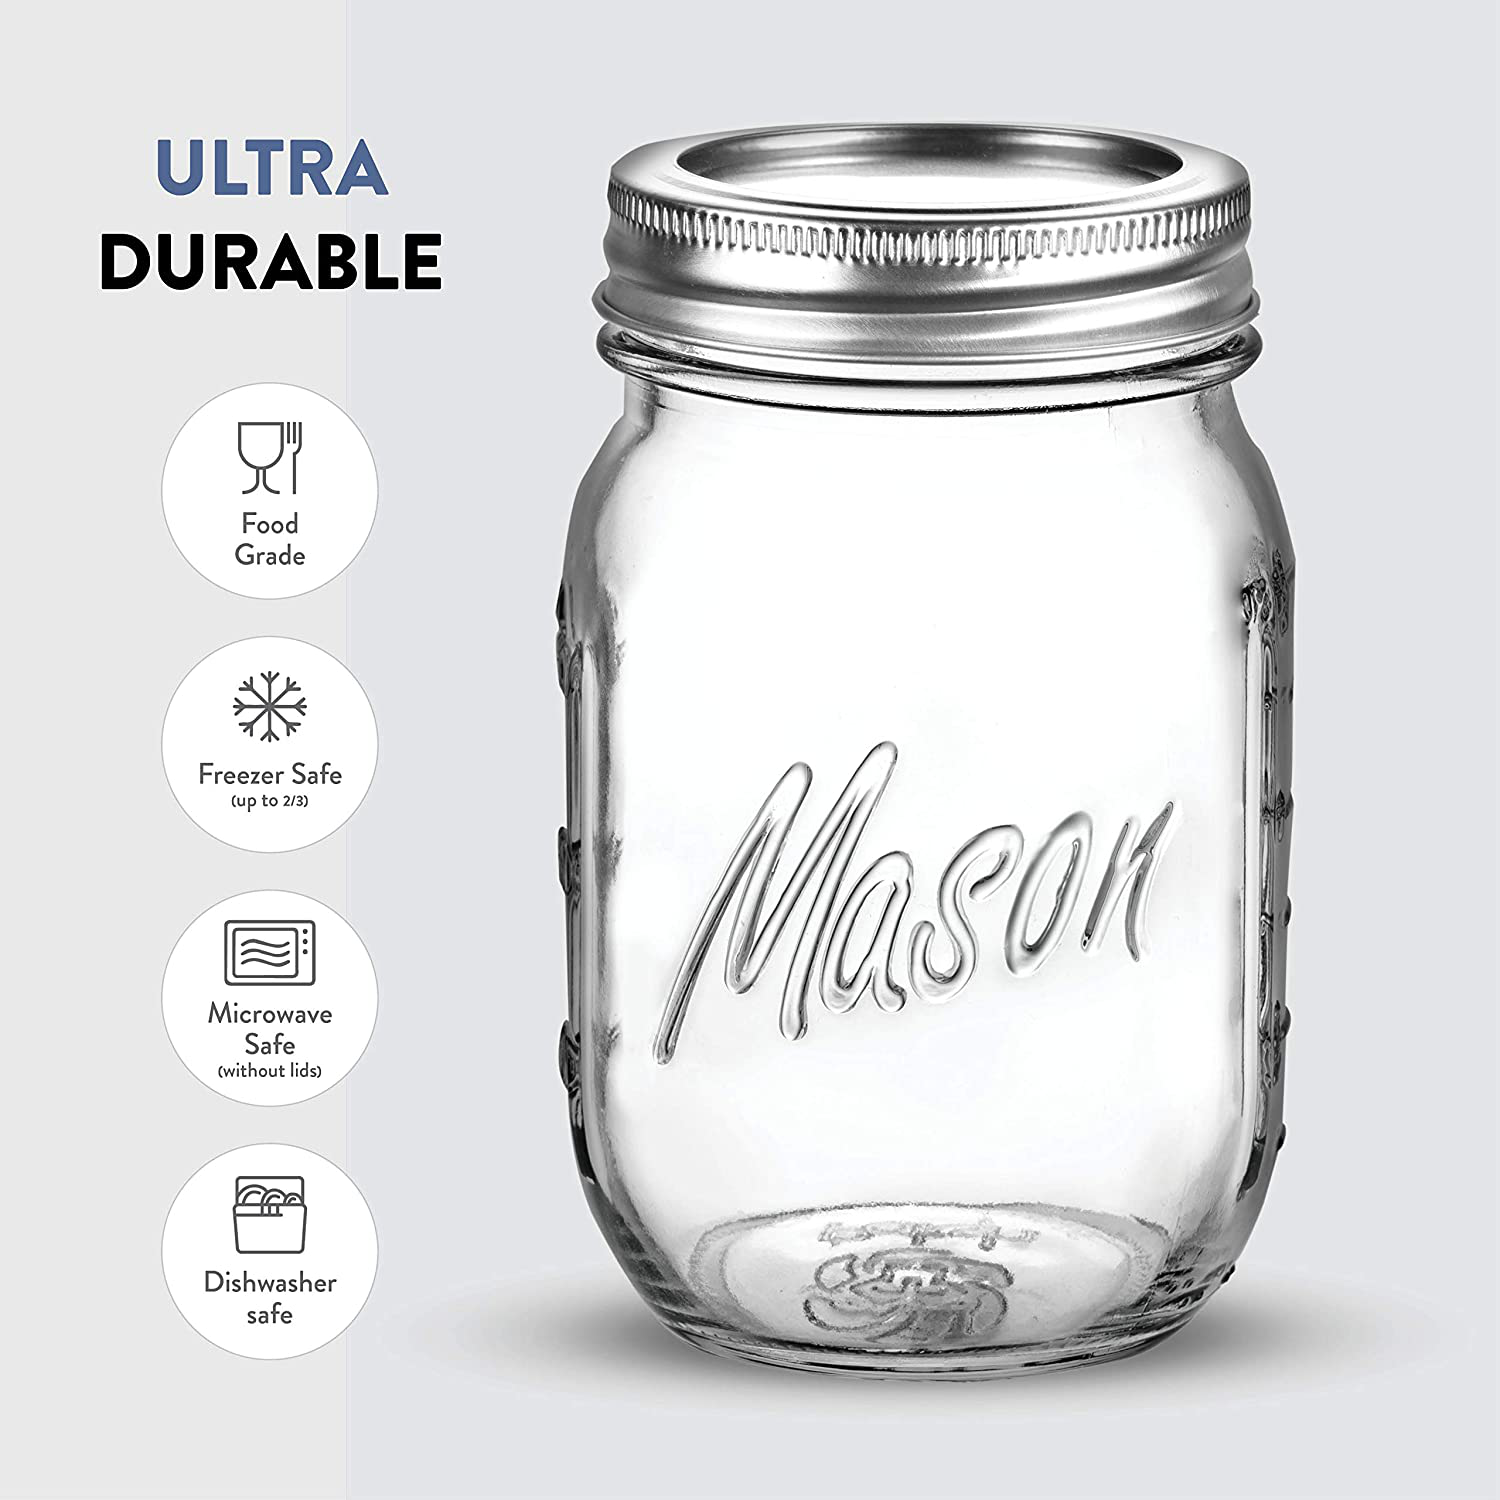 Regular-Mouth Glass Mason Jars, 16-Ounce (4-Pack) Glass Canning Jars with Silver Metal Airtight Lids and Bands with Measurement Marks, for Canning, Preserving, Meal Prep, Overnight Oats, Jam, Jelly,